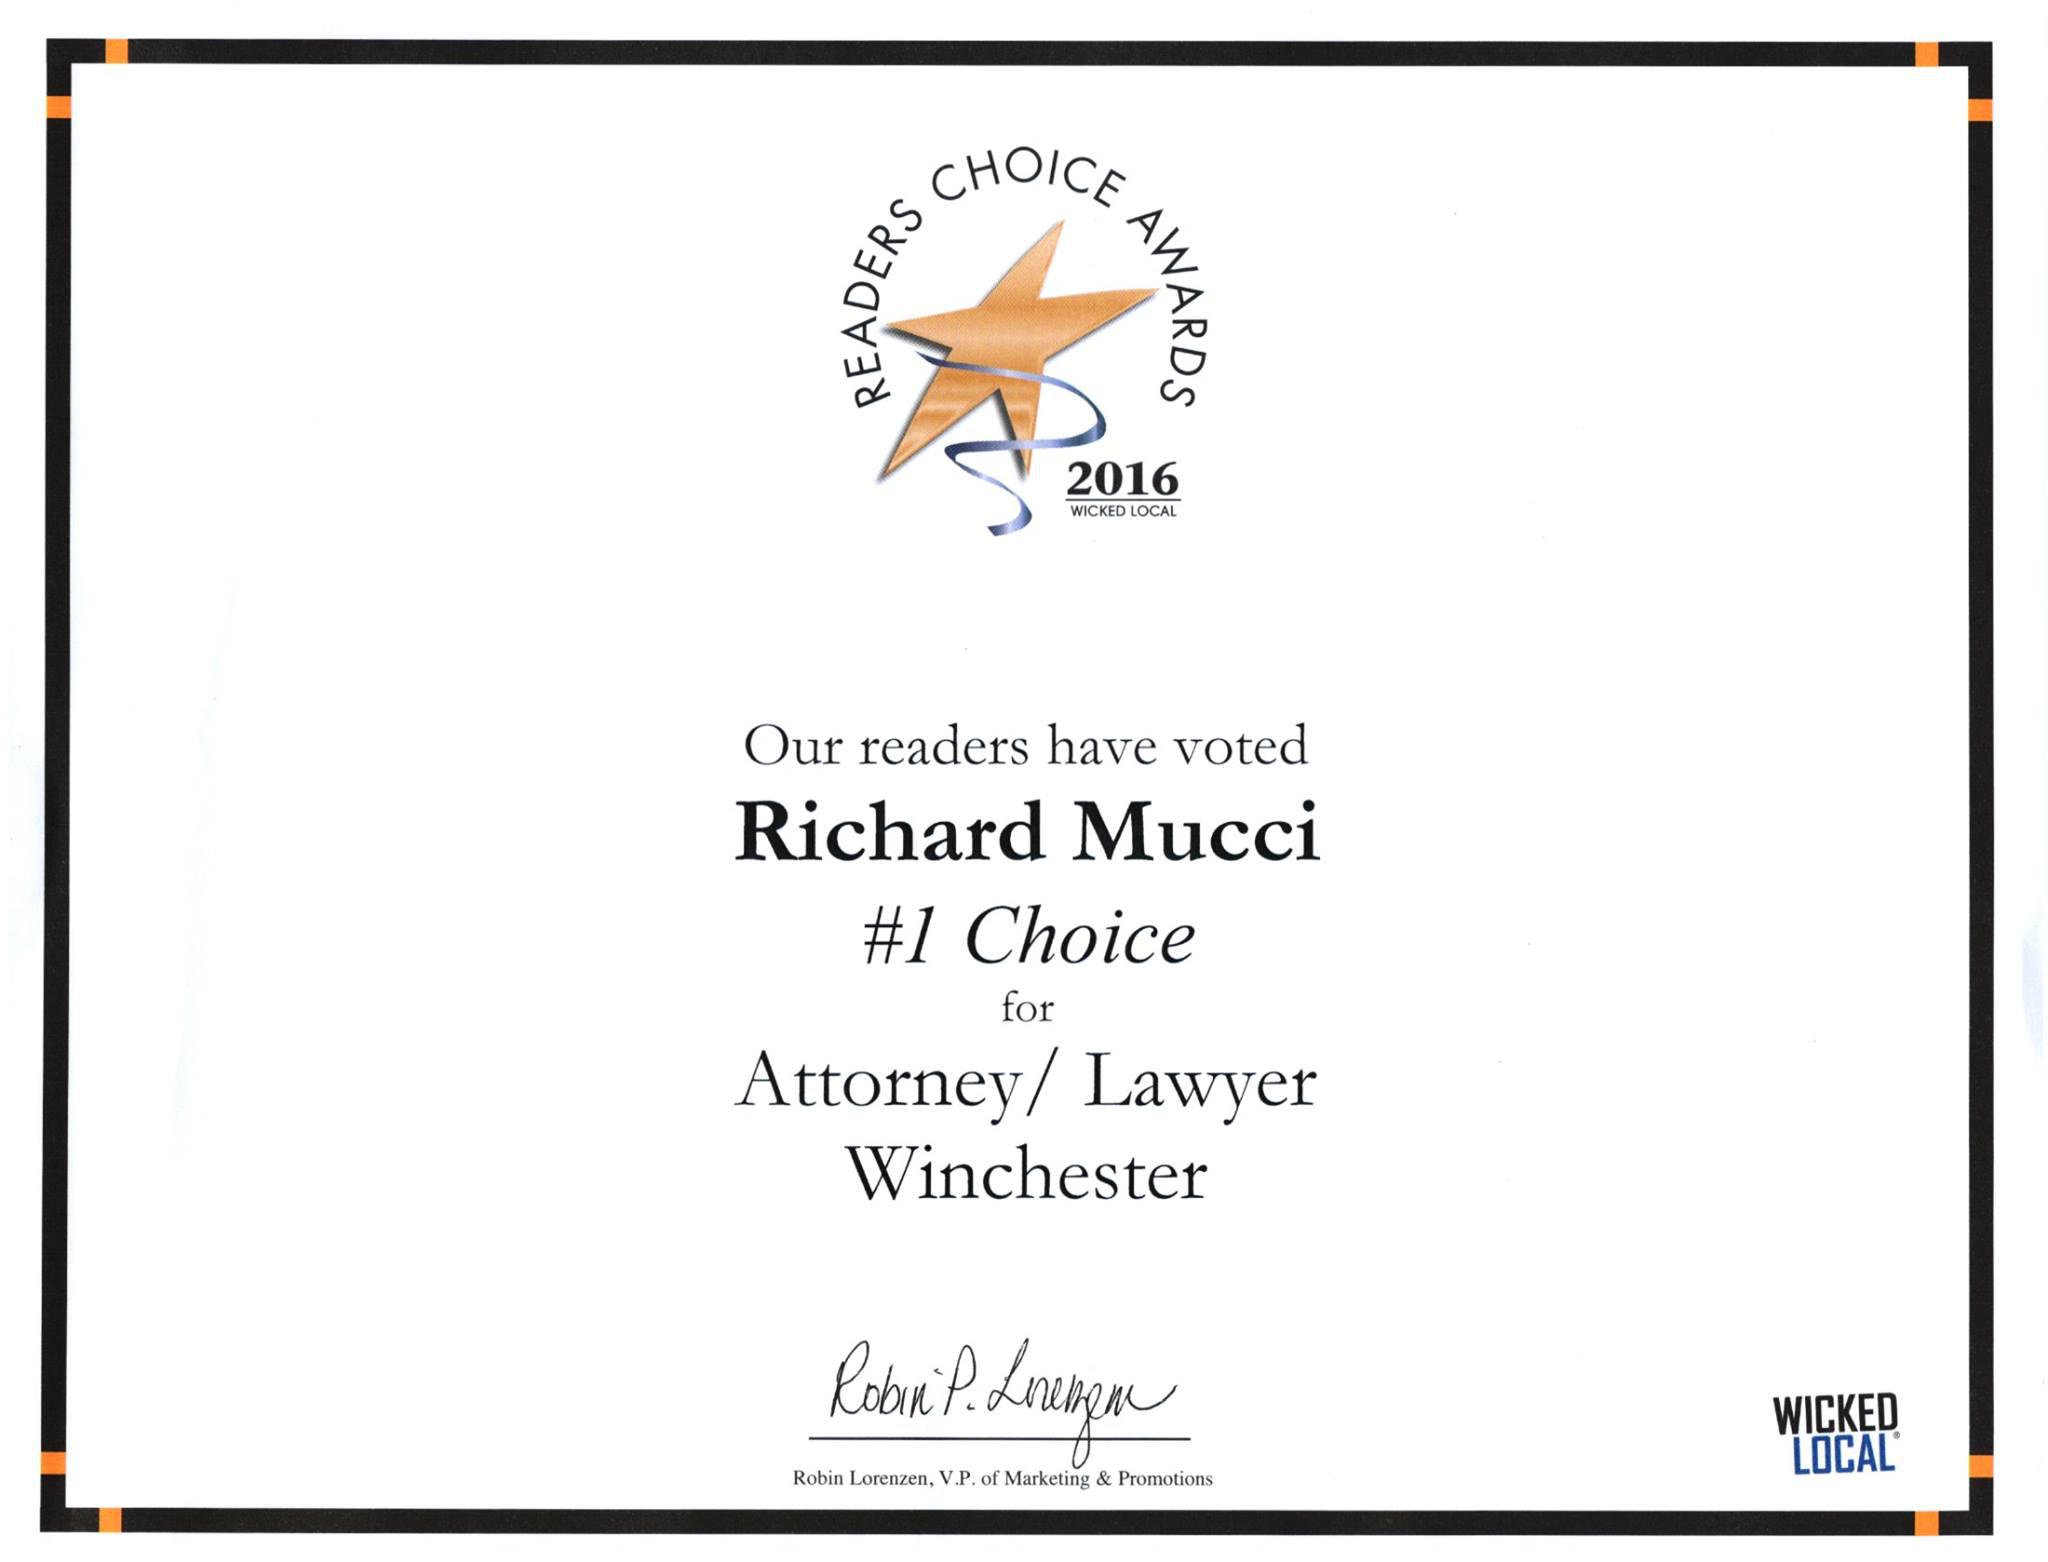 Wicked Local Reader's Awarded Attorney